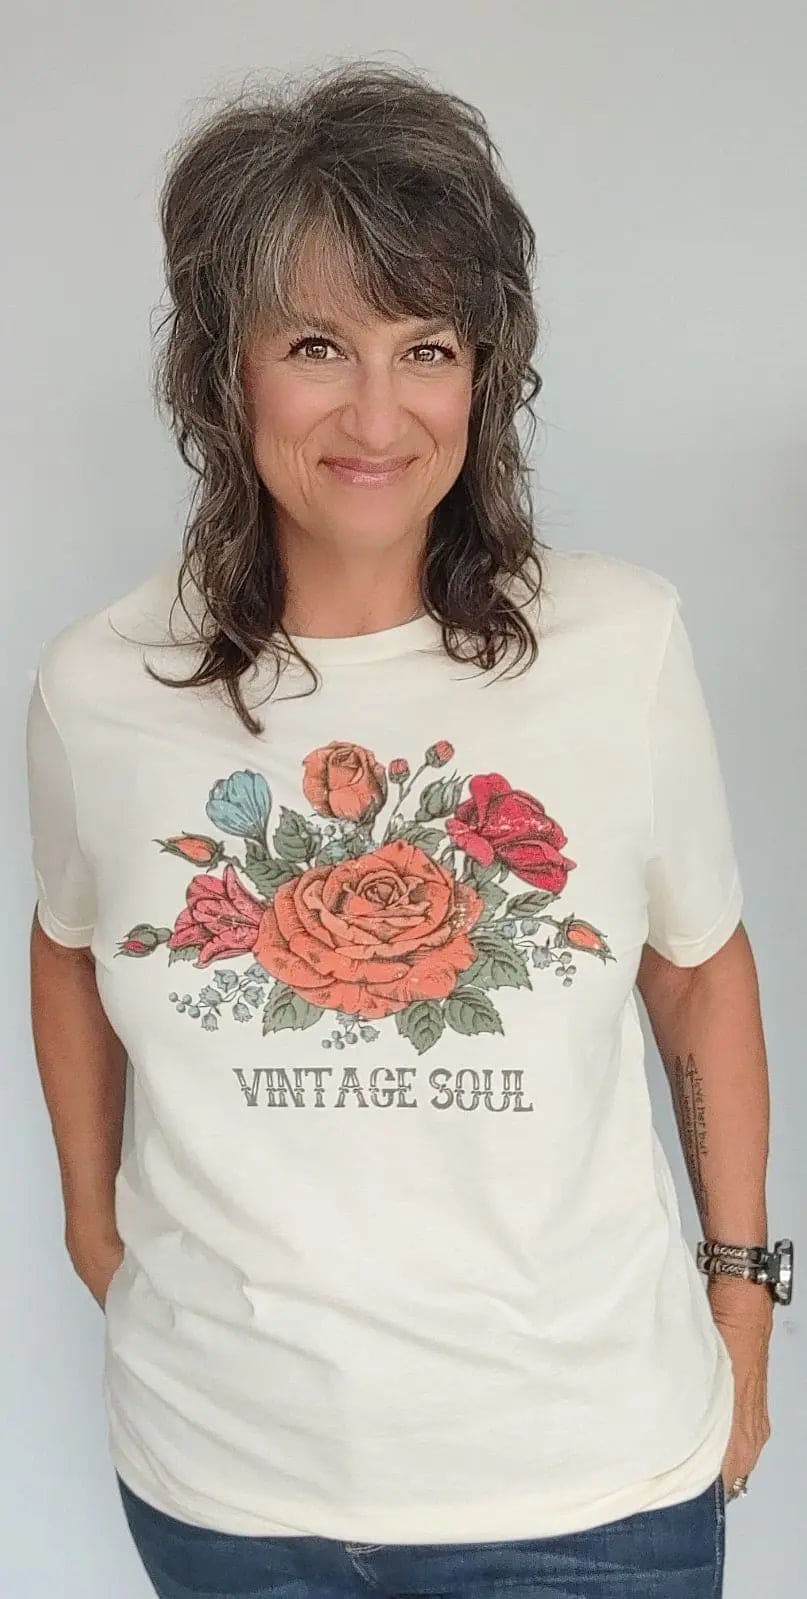 Vintage Soul Floral Graphic Tee in Cream The Magnolia Cottage Boutique